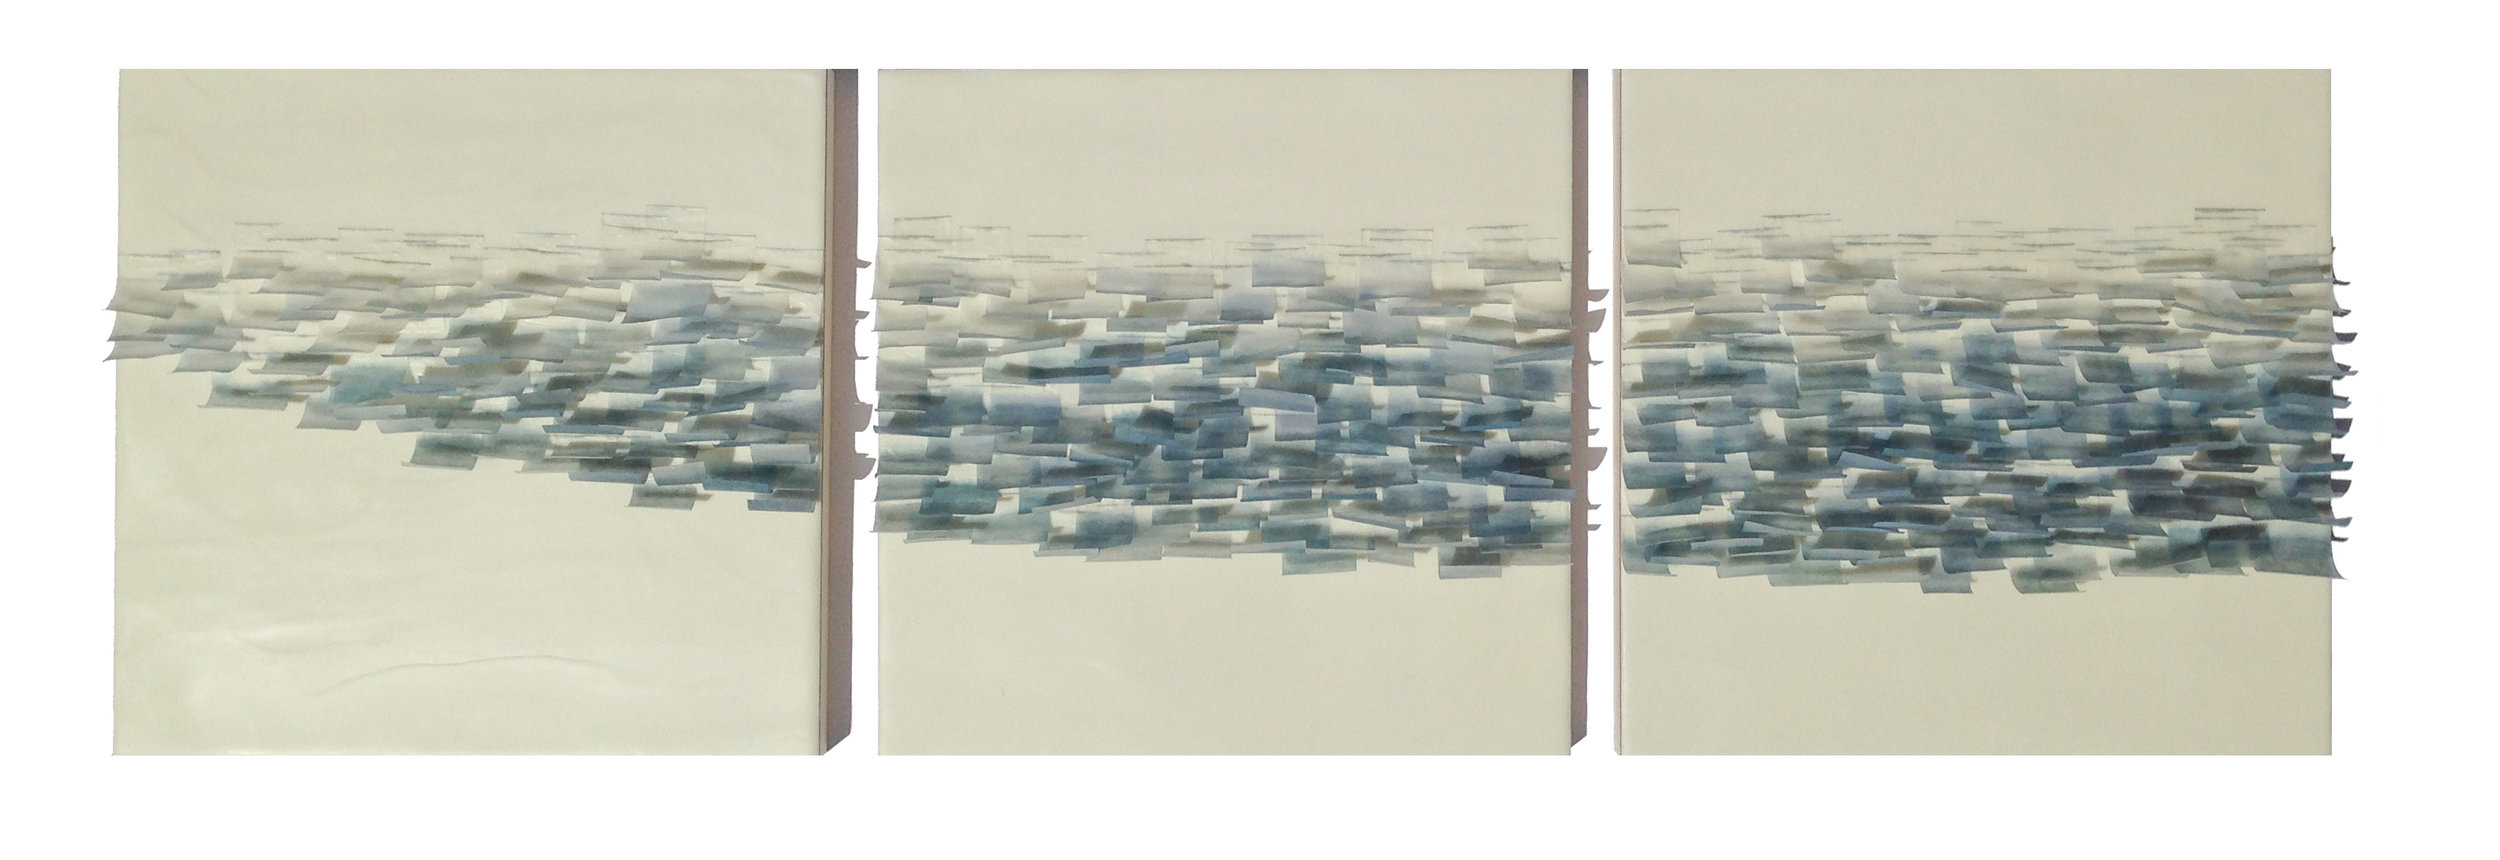  Flutter 5, 2014 (sold) Encaustic, Mulberry Paper, Watercolor 12 x 36&nbsp;x 1 inches  The Flutter series is designed to evoke the texture of ocean water.  The pieces in this series attempt to capture the ever-changing light, transparency and movemen